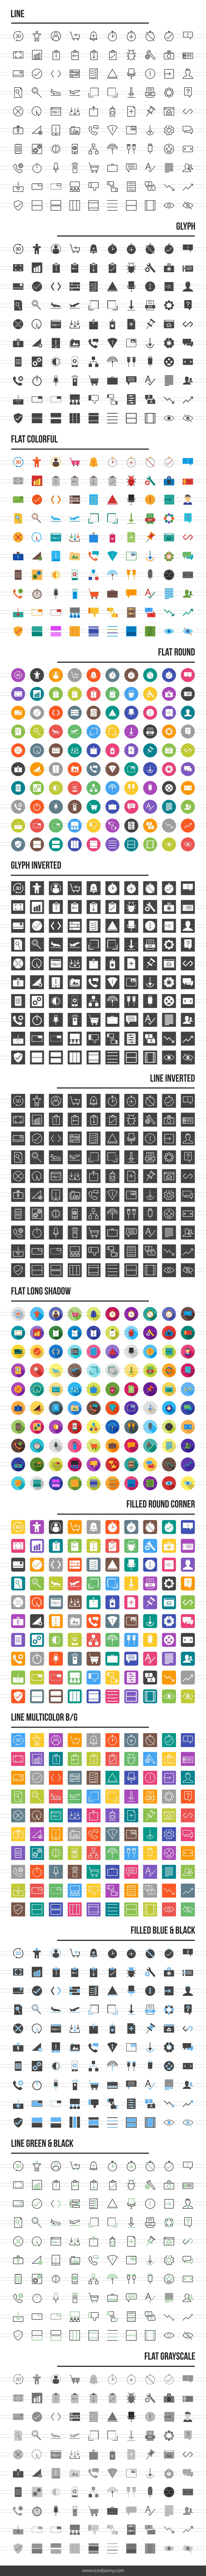 1200 Material Design Icons preview image.